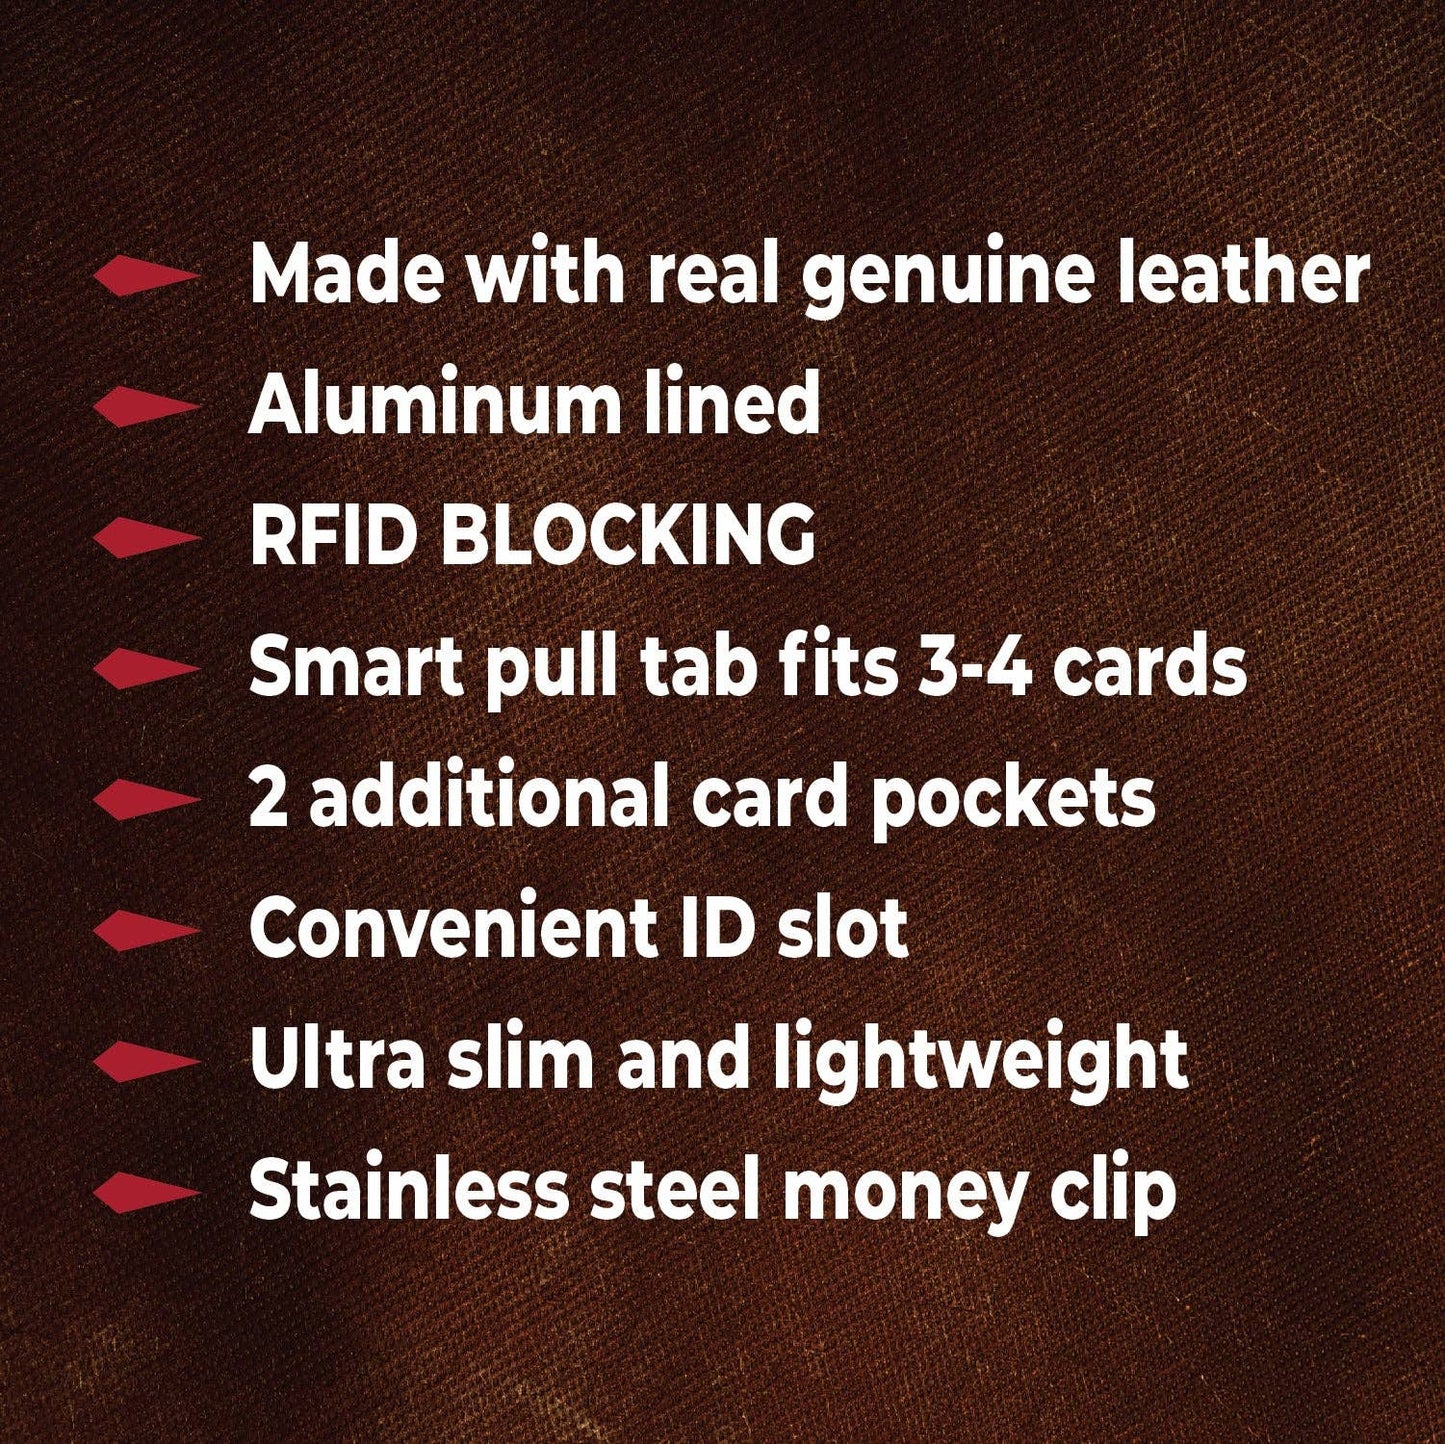 LEATHER RFID WALLET